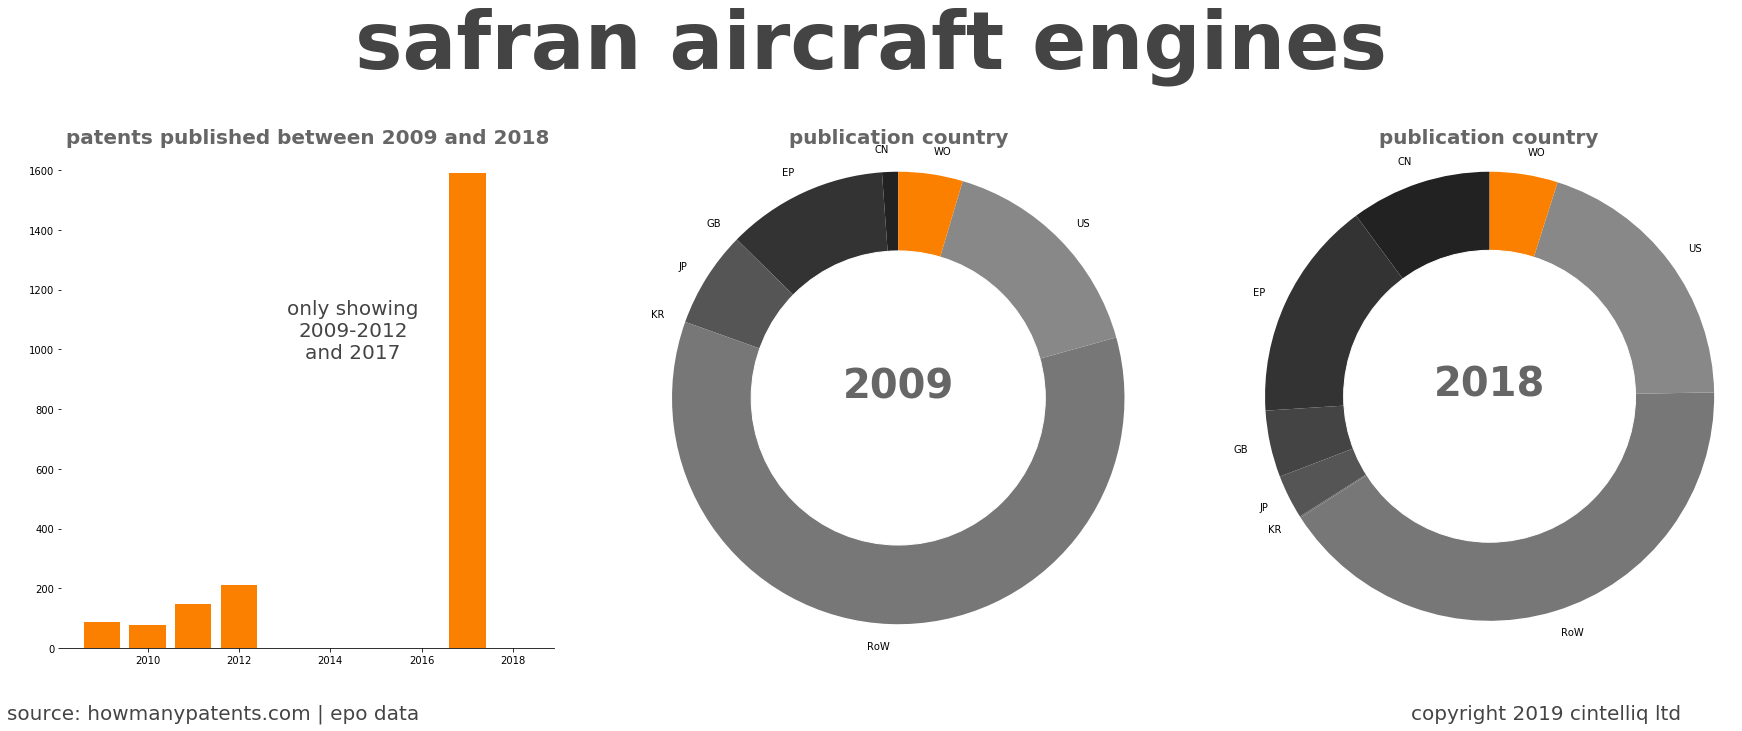 summary of patents for Safran Aircraft Engines